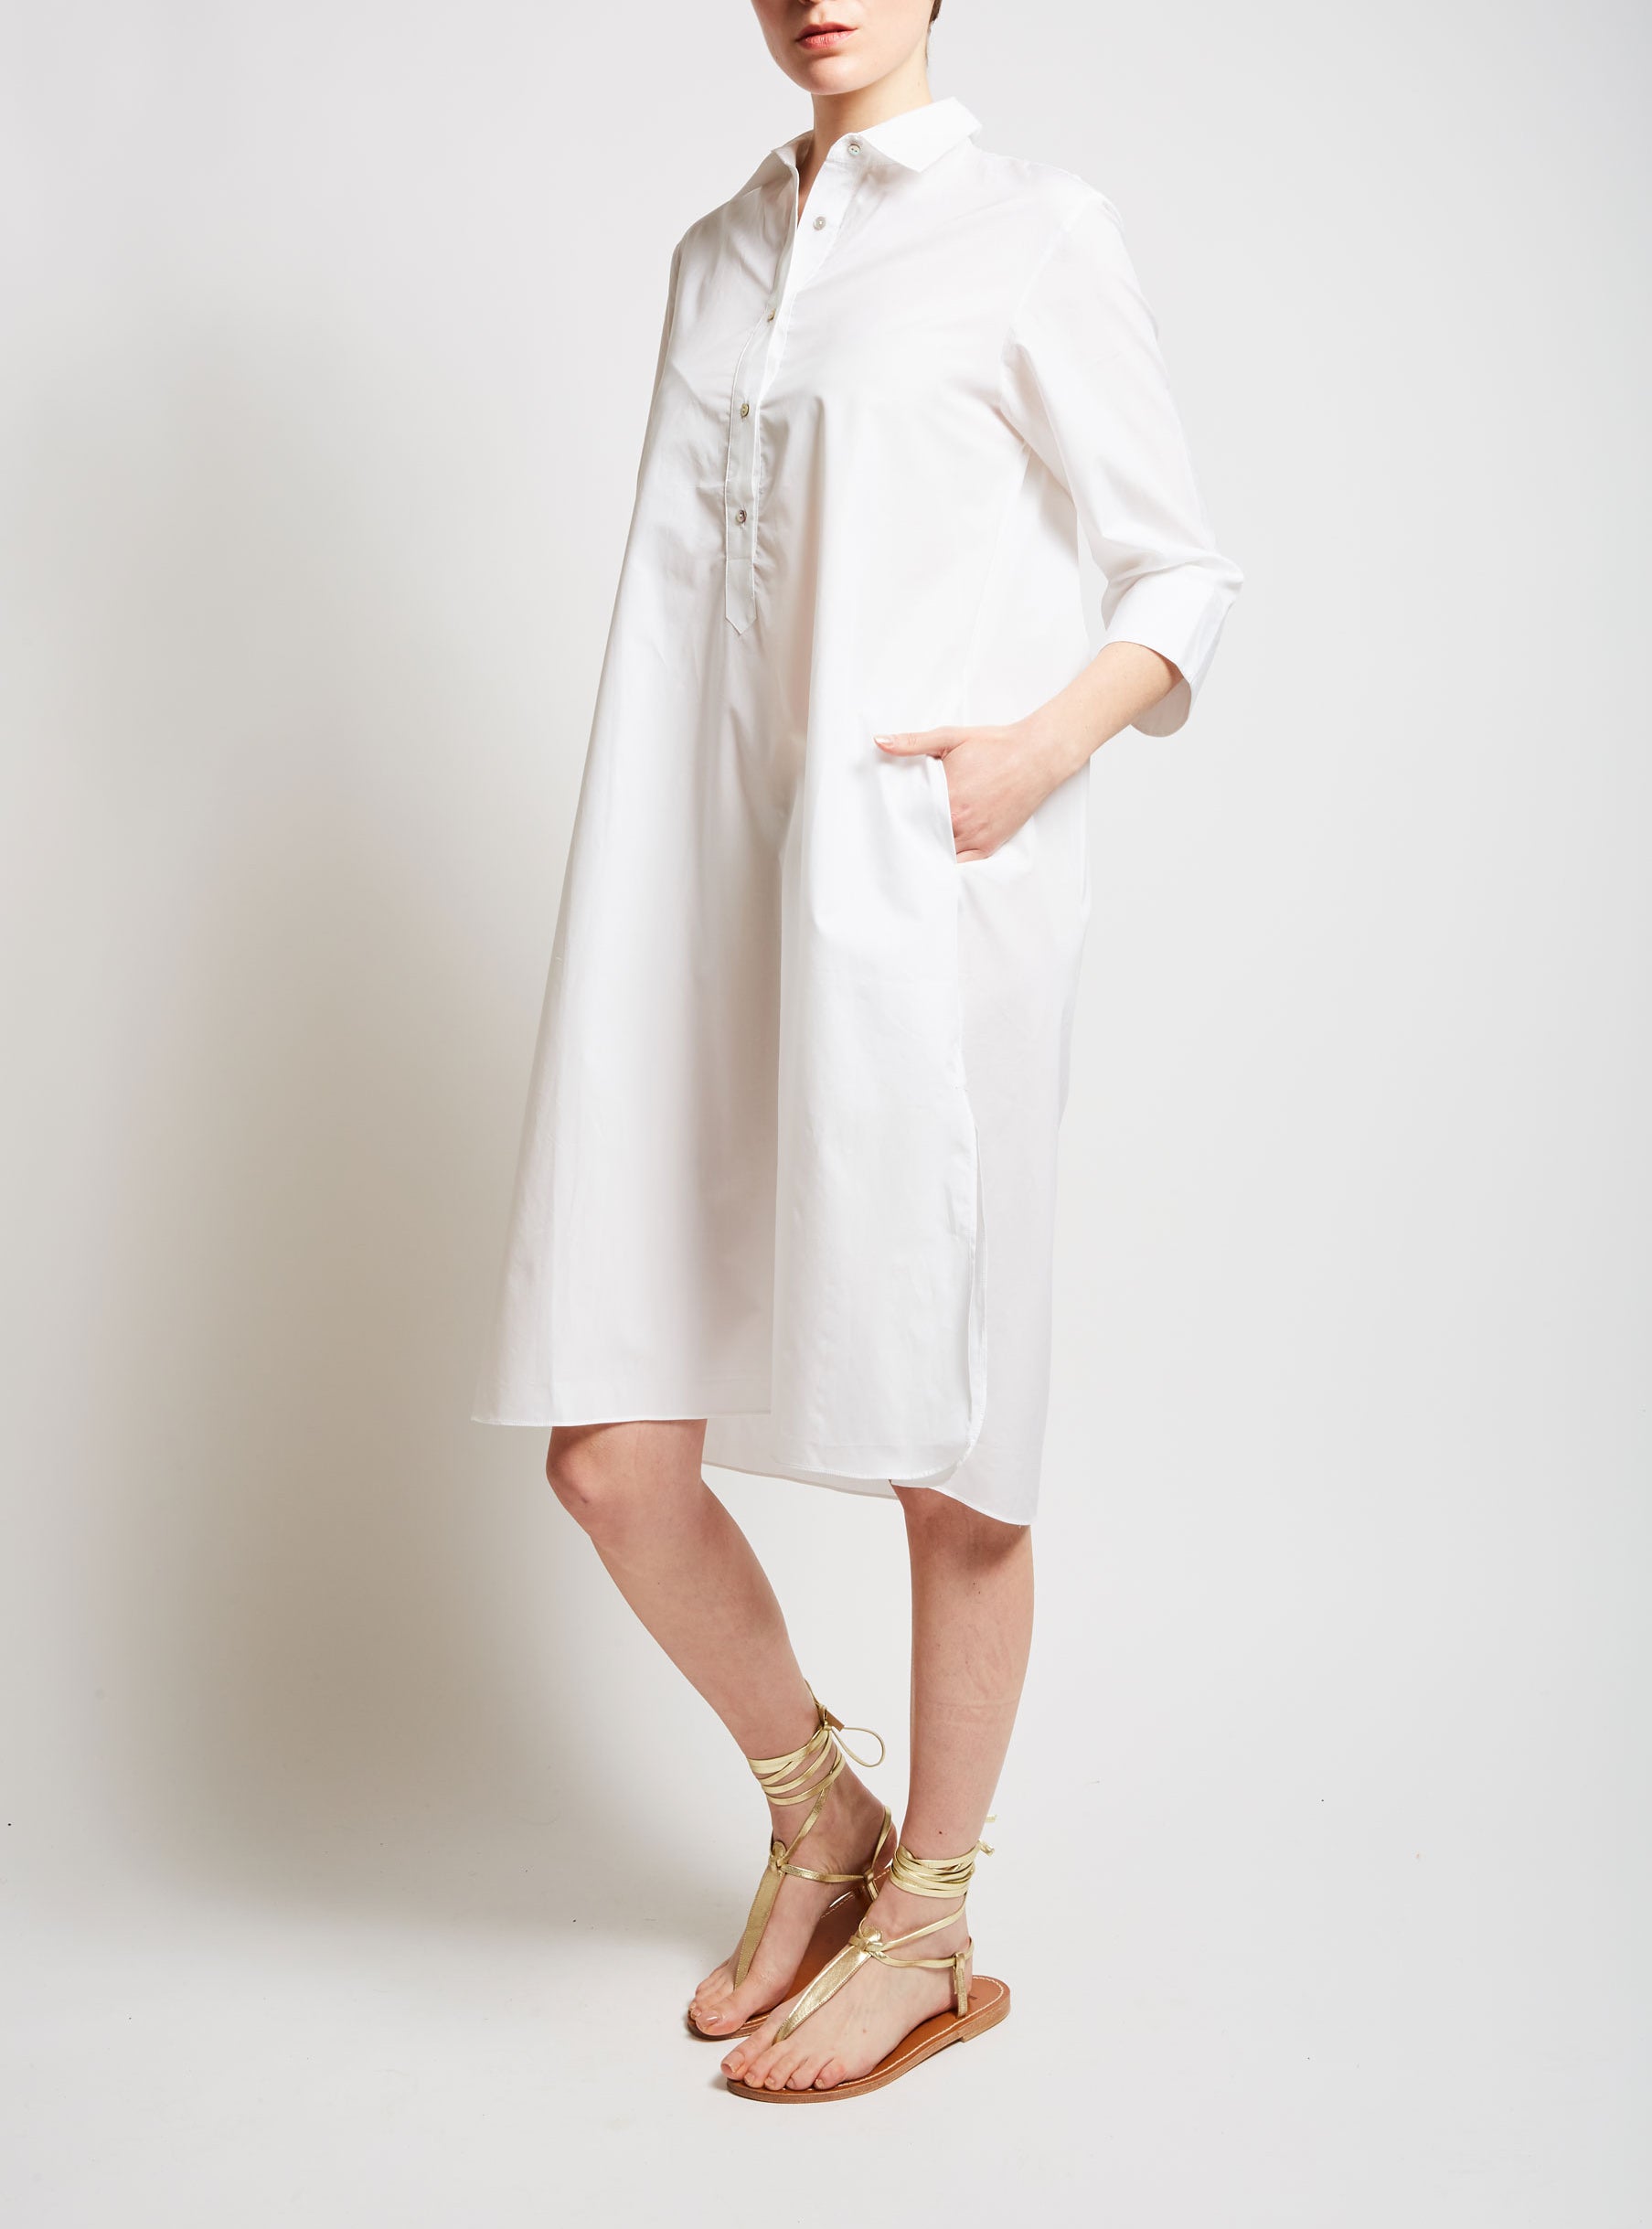 Side view - Iconic Angelica White Shirt knee Dress by Thierry Colson